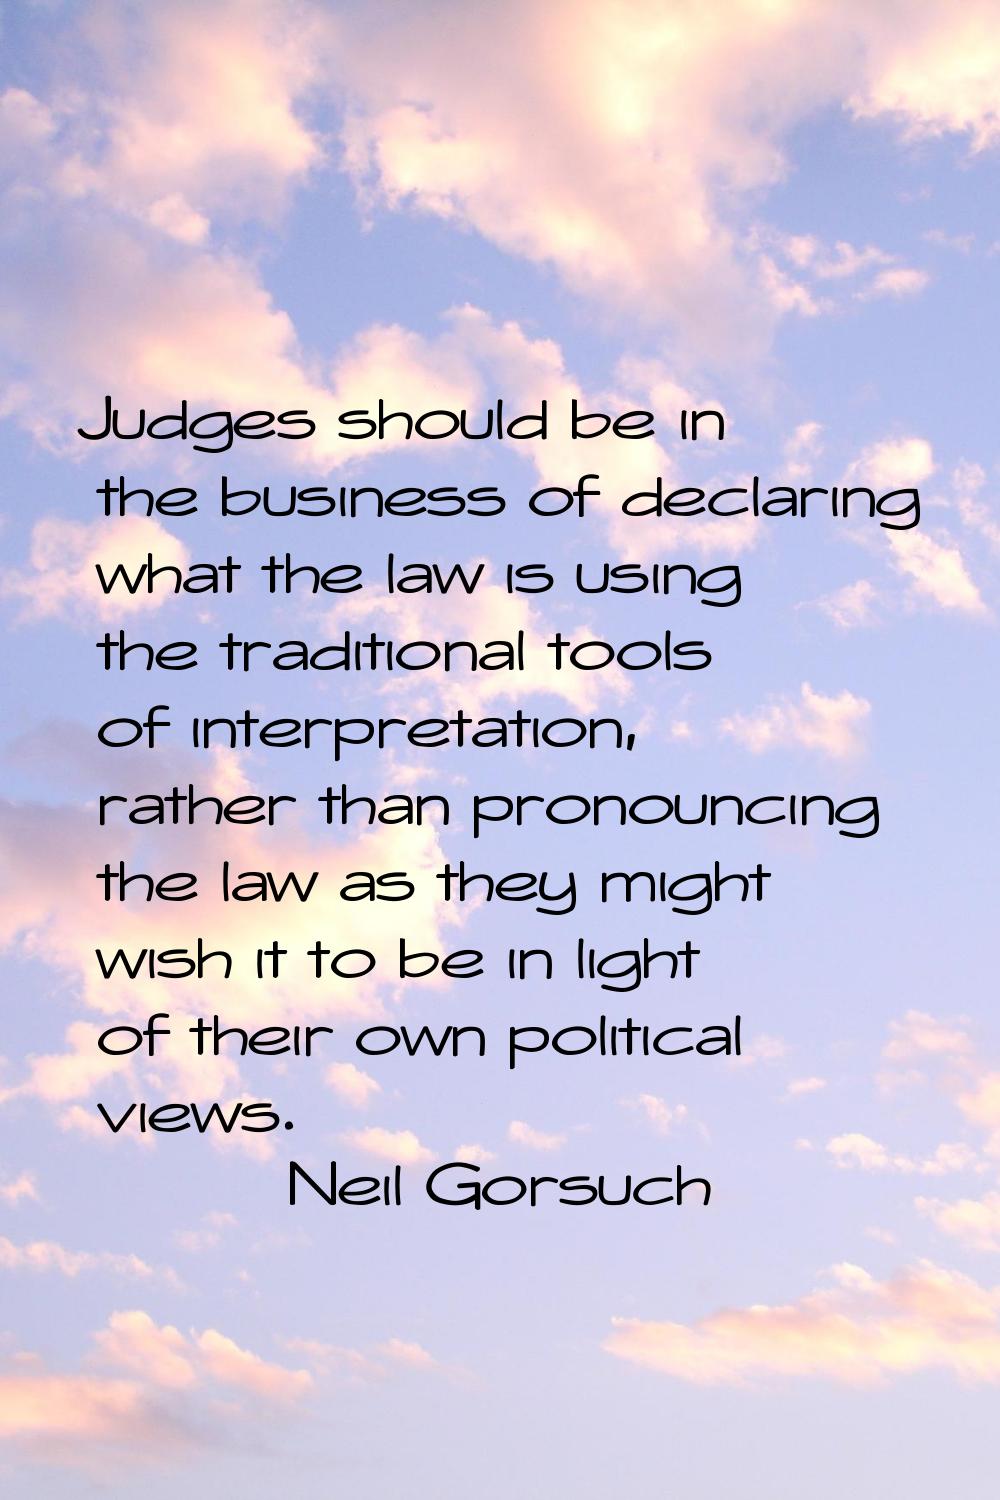 Judges should be in the business of declaring what the law is using the traditional tools of interp